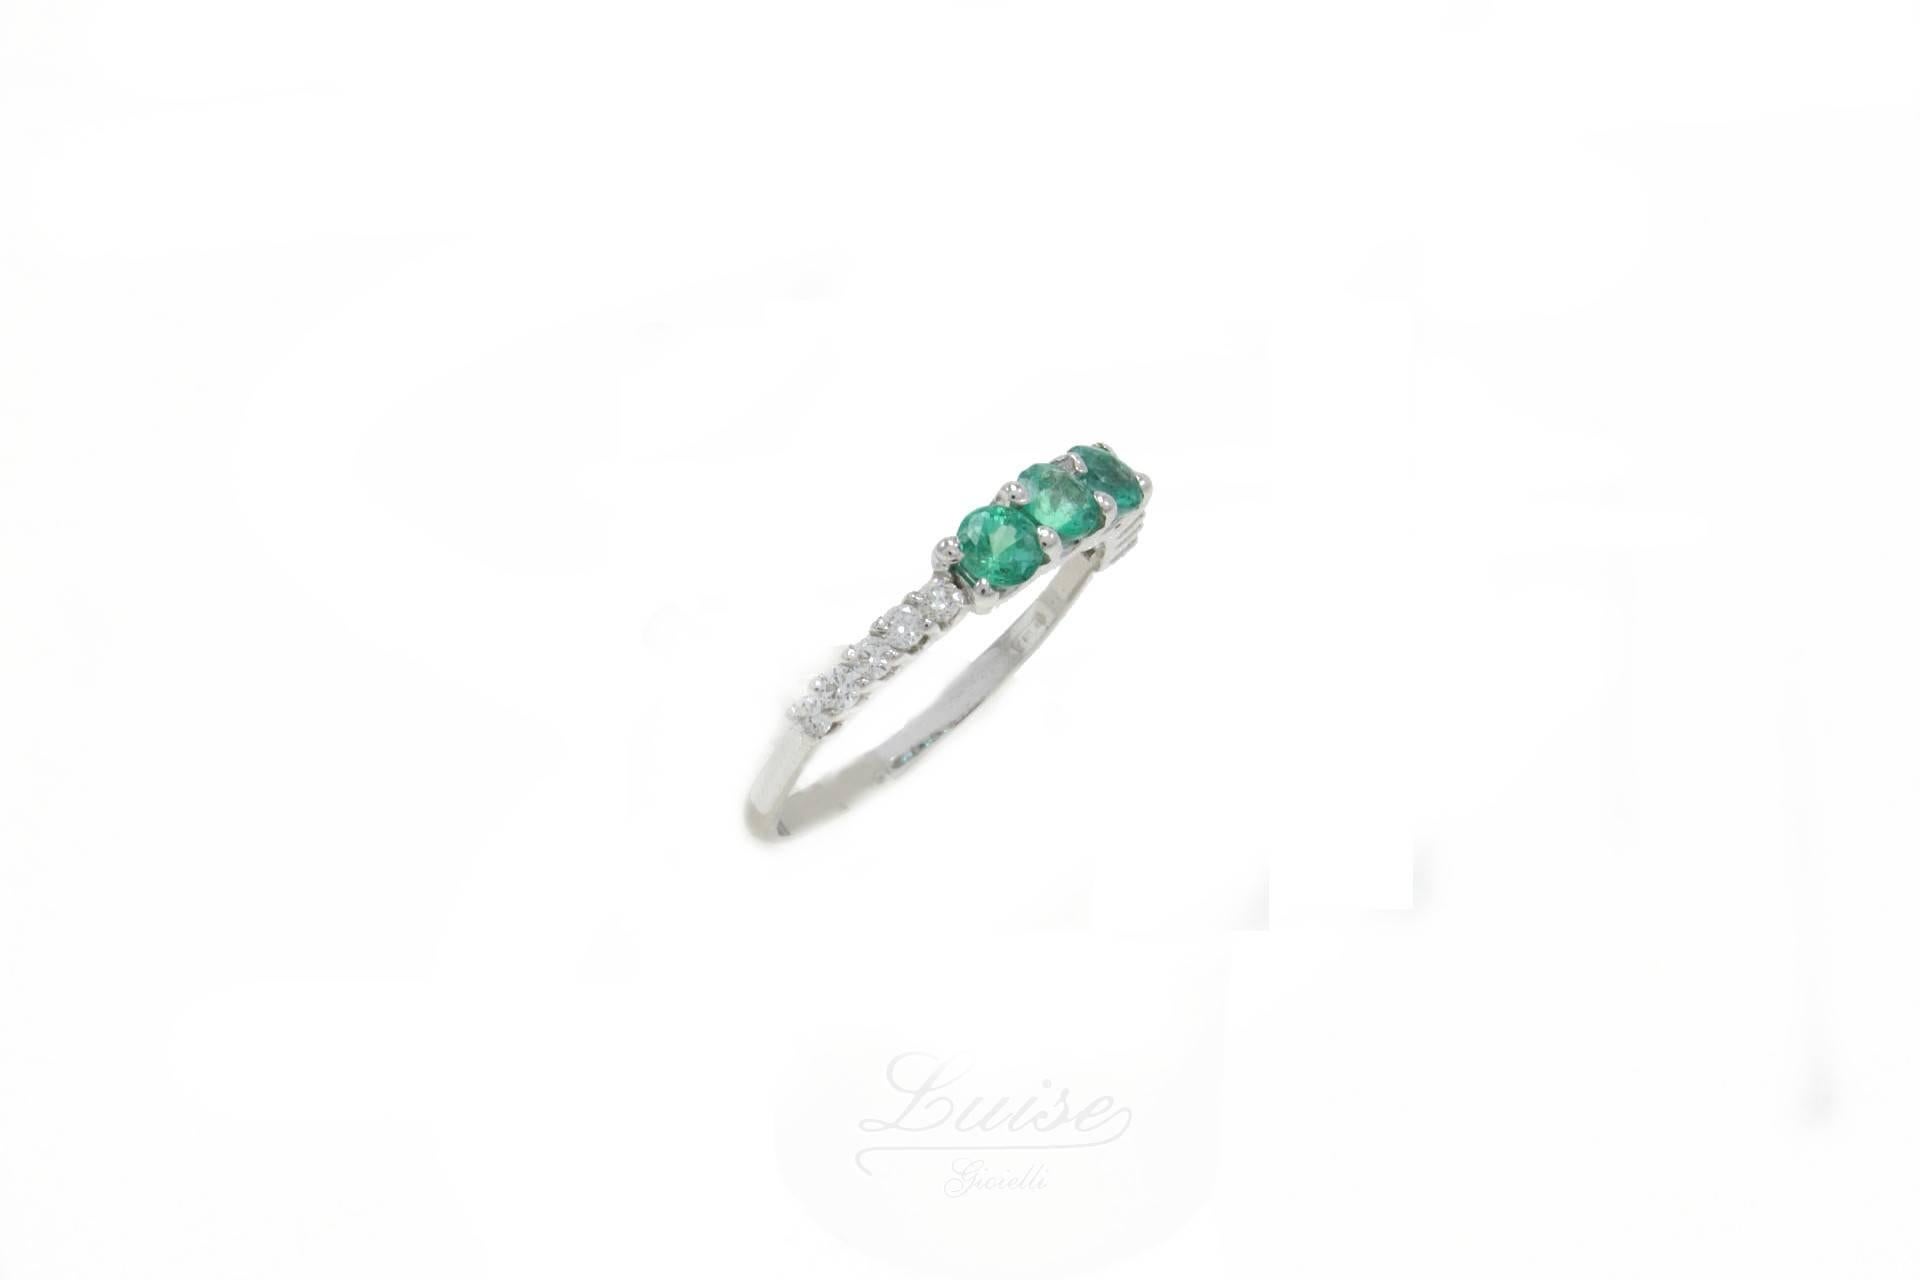 Shiny ring in 18kt white gold composed of 3 central emeralds and diamonds on both sides.

Diamonds 0.18 kt
Emeralds 0.48 kt
Tot.Weight 1.90 gr
R.F rig  